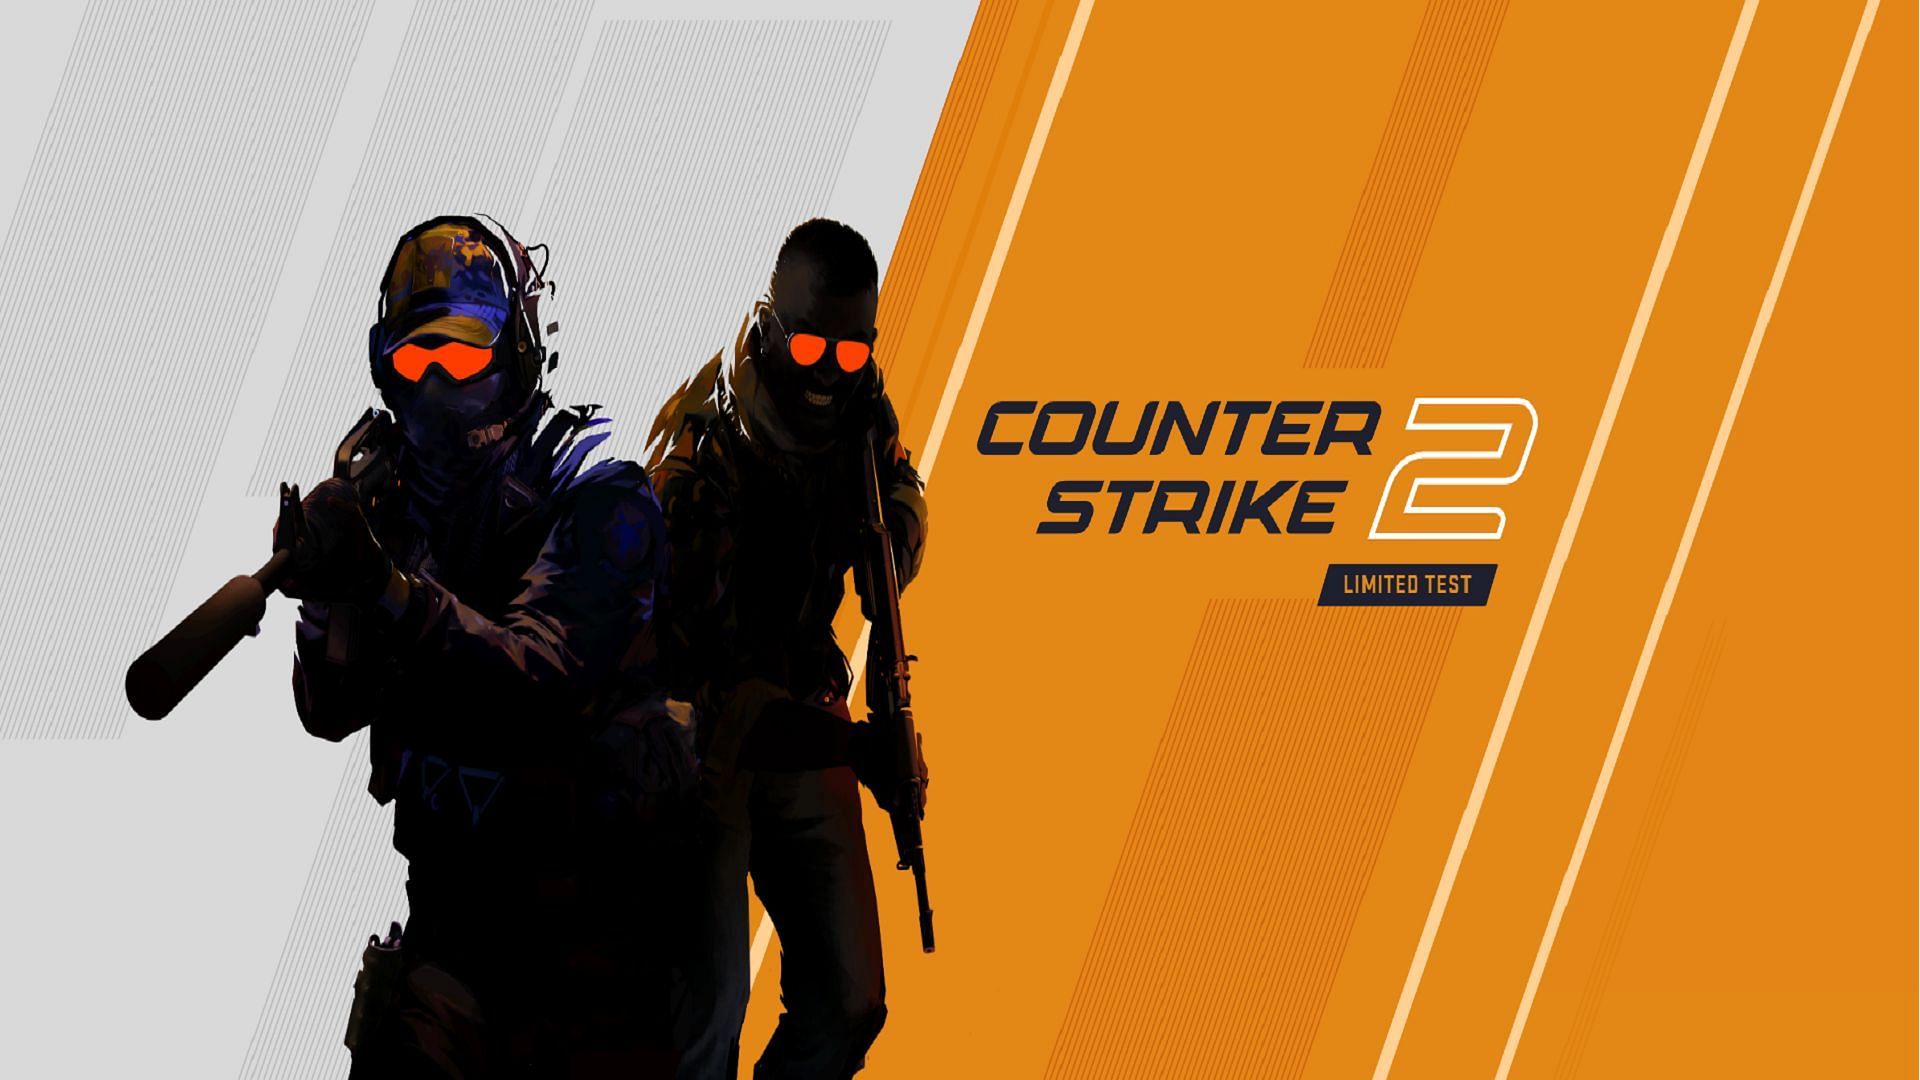 Cheaters can access Counter-Strike 2 limited test but content creators are left out (Image via Valve)